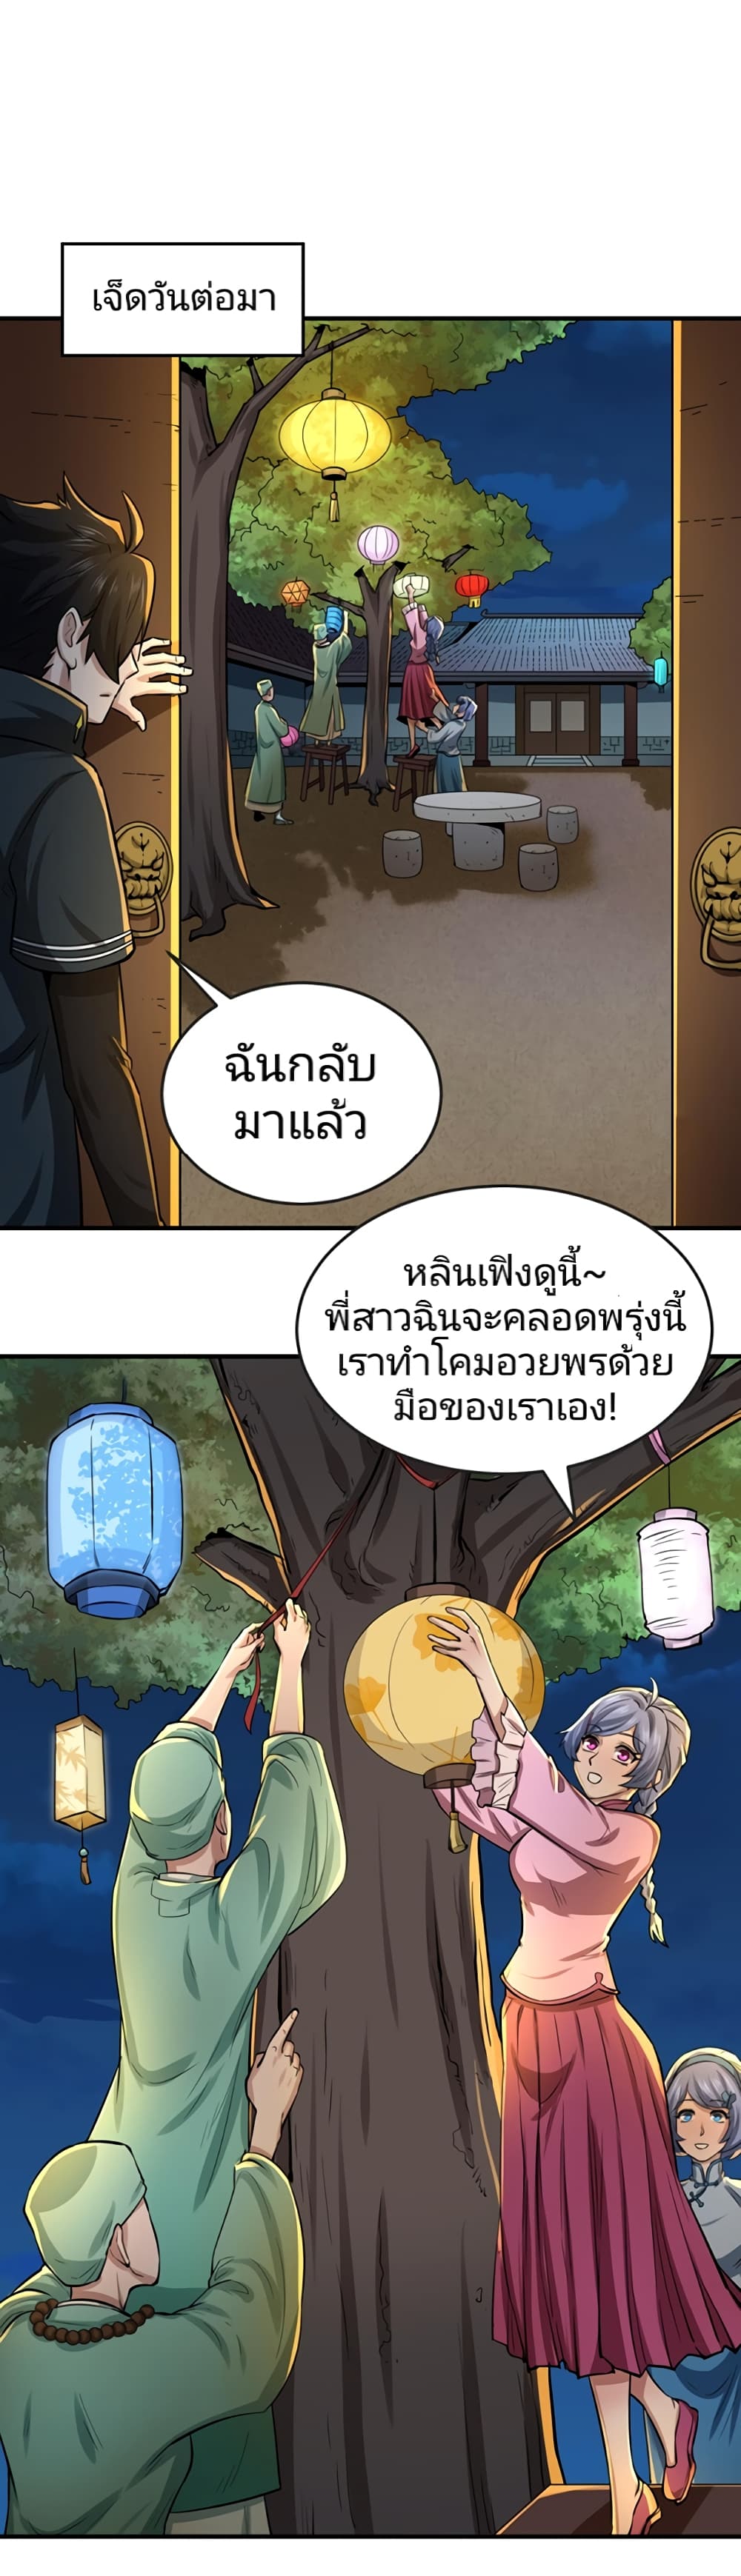 The Age of Ghost Spirits à¸à¸­à¸à¸à¸µà¹ 45 (14)